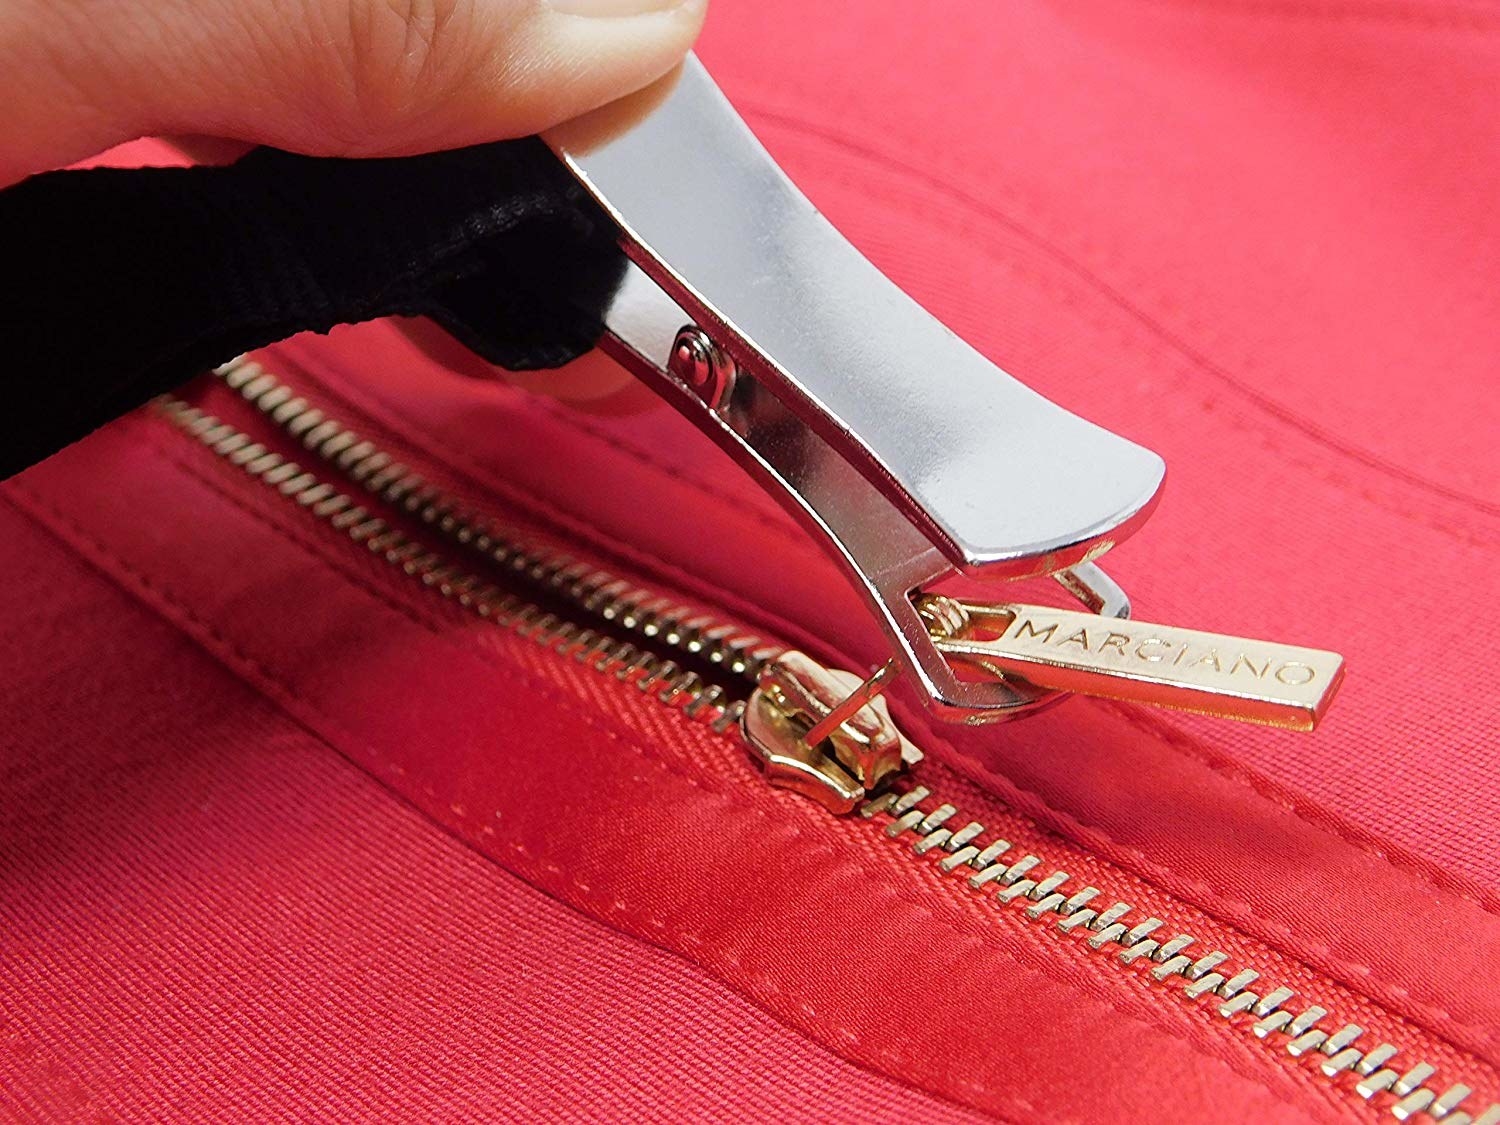 The puller looped around a zipper with a person pulling the zipper closed by pulling the attached cord